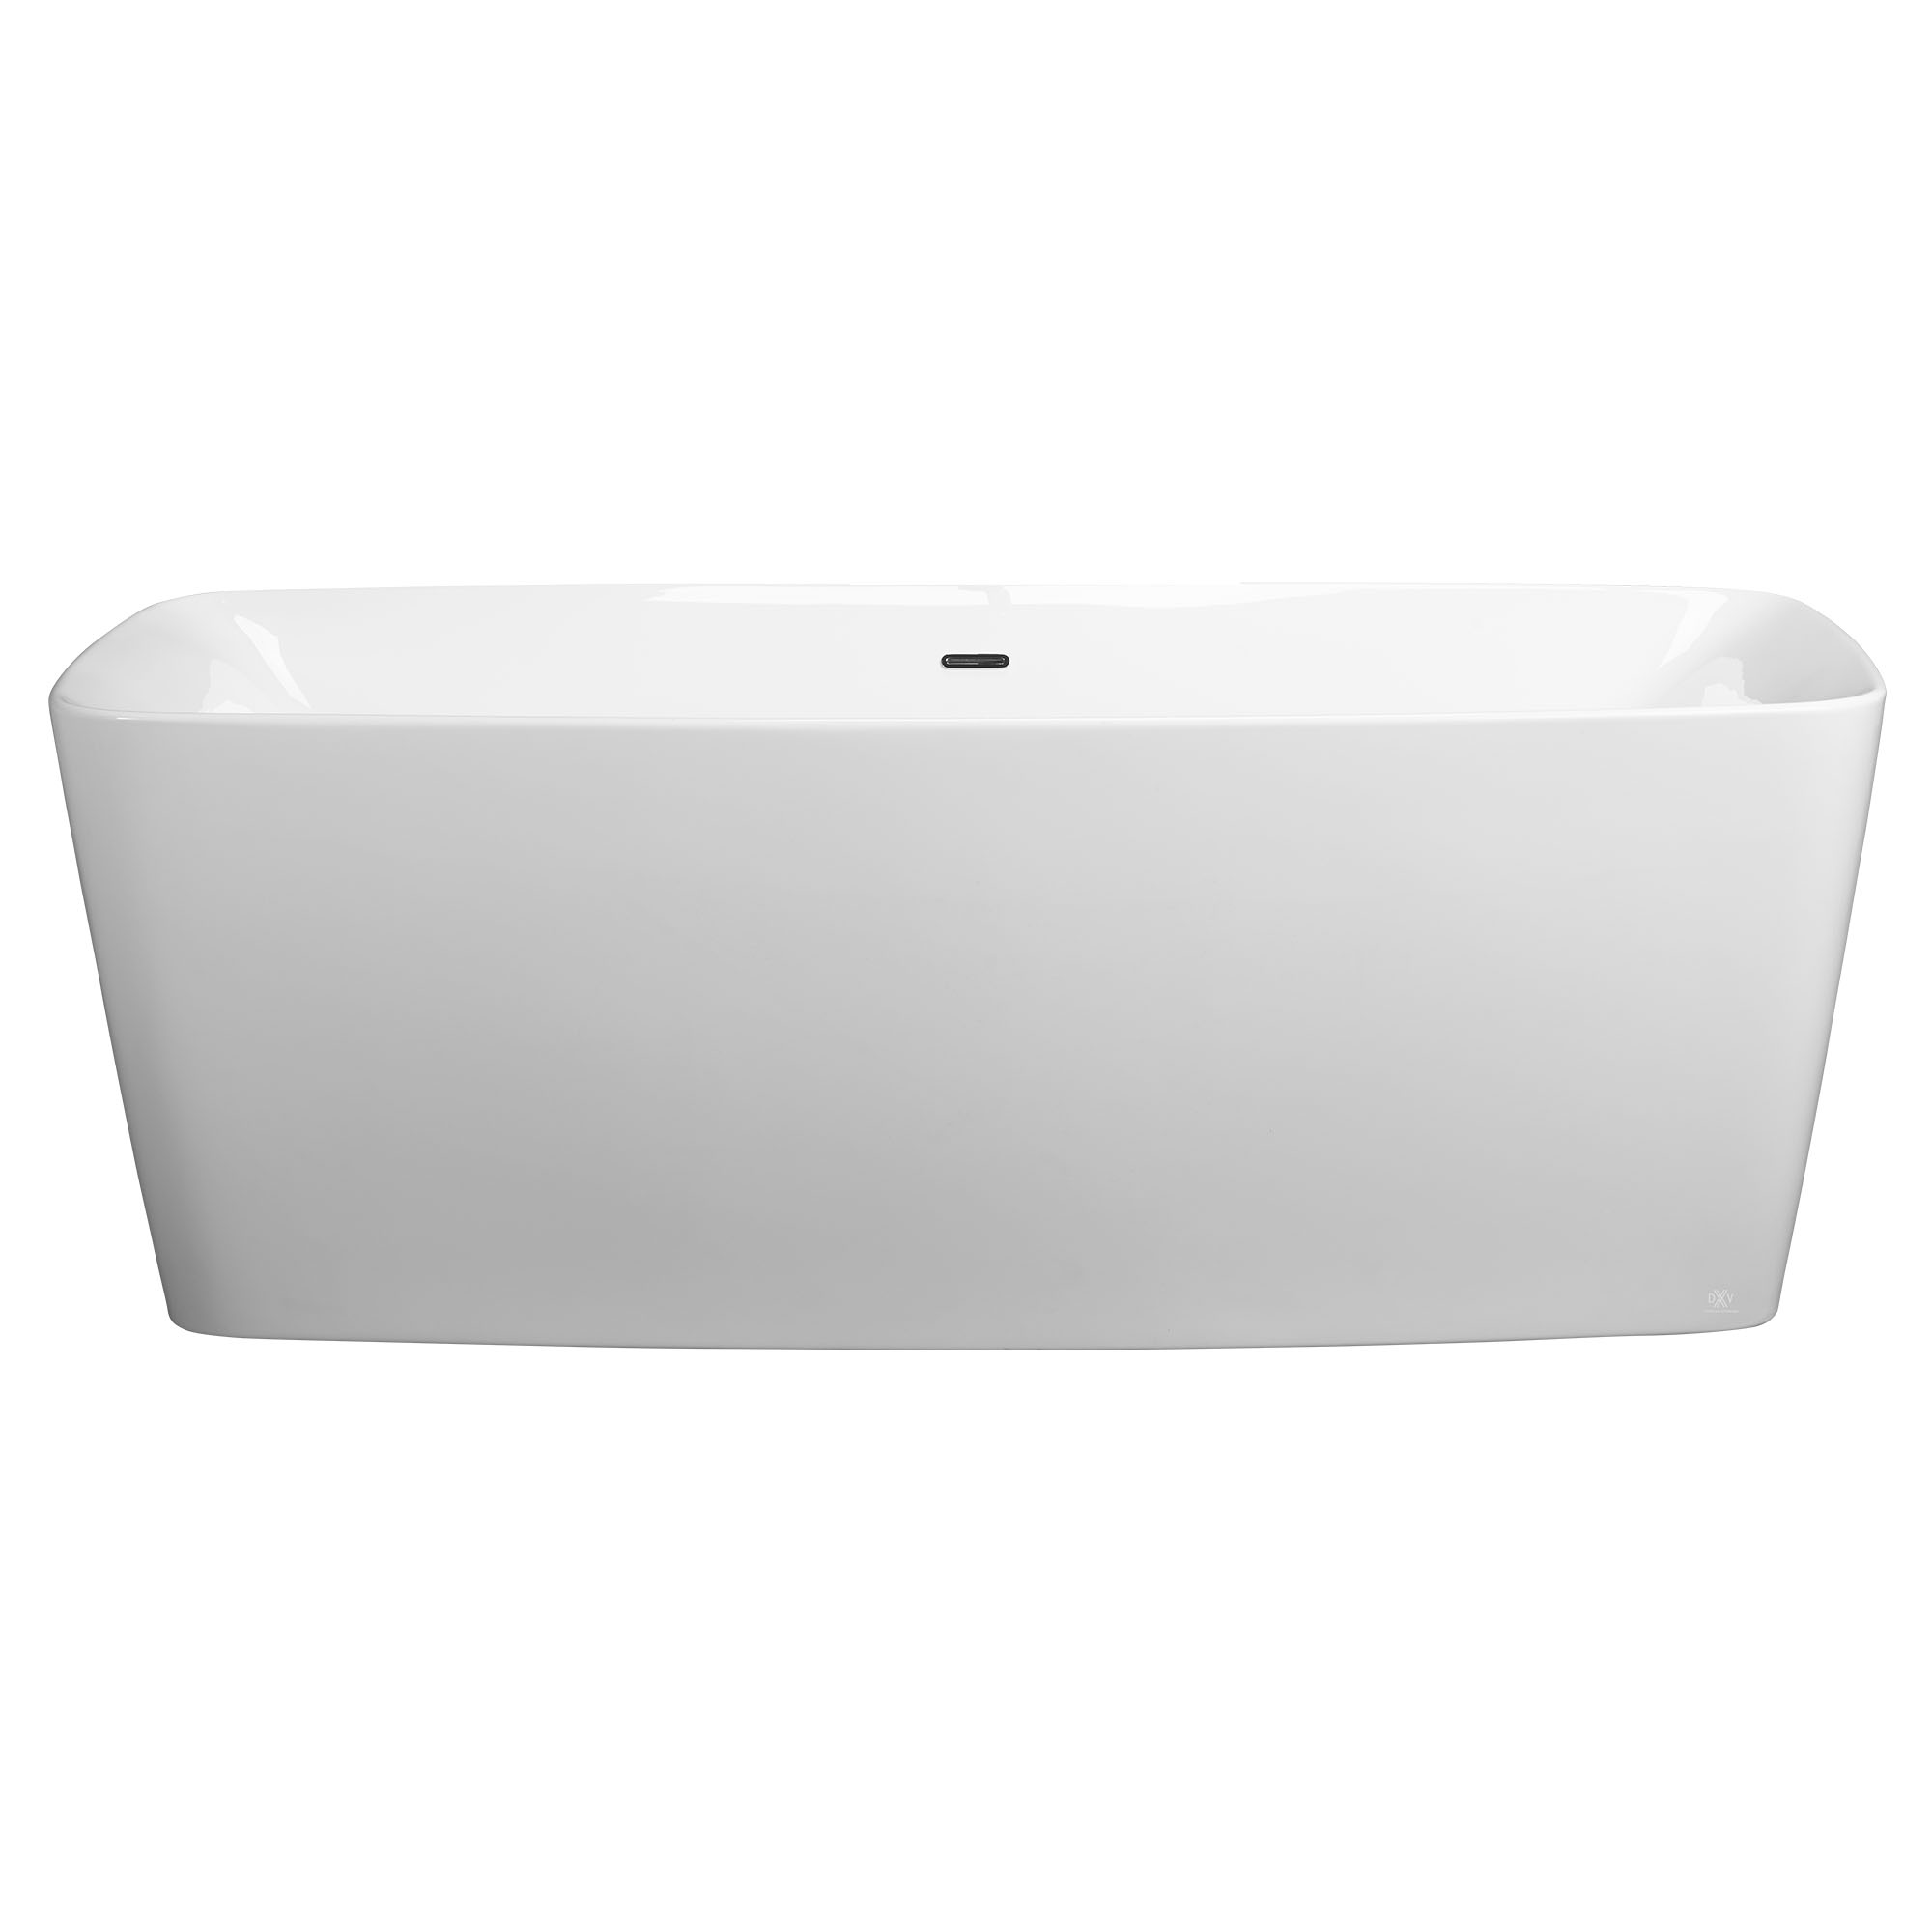 Equility 67 x 33 in. Freestanding Bathtub